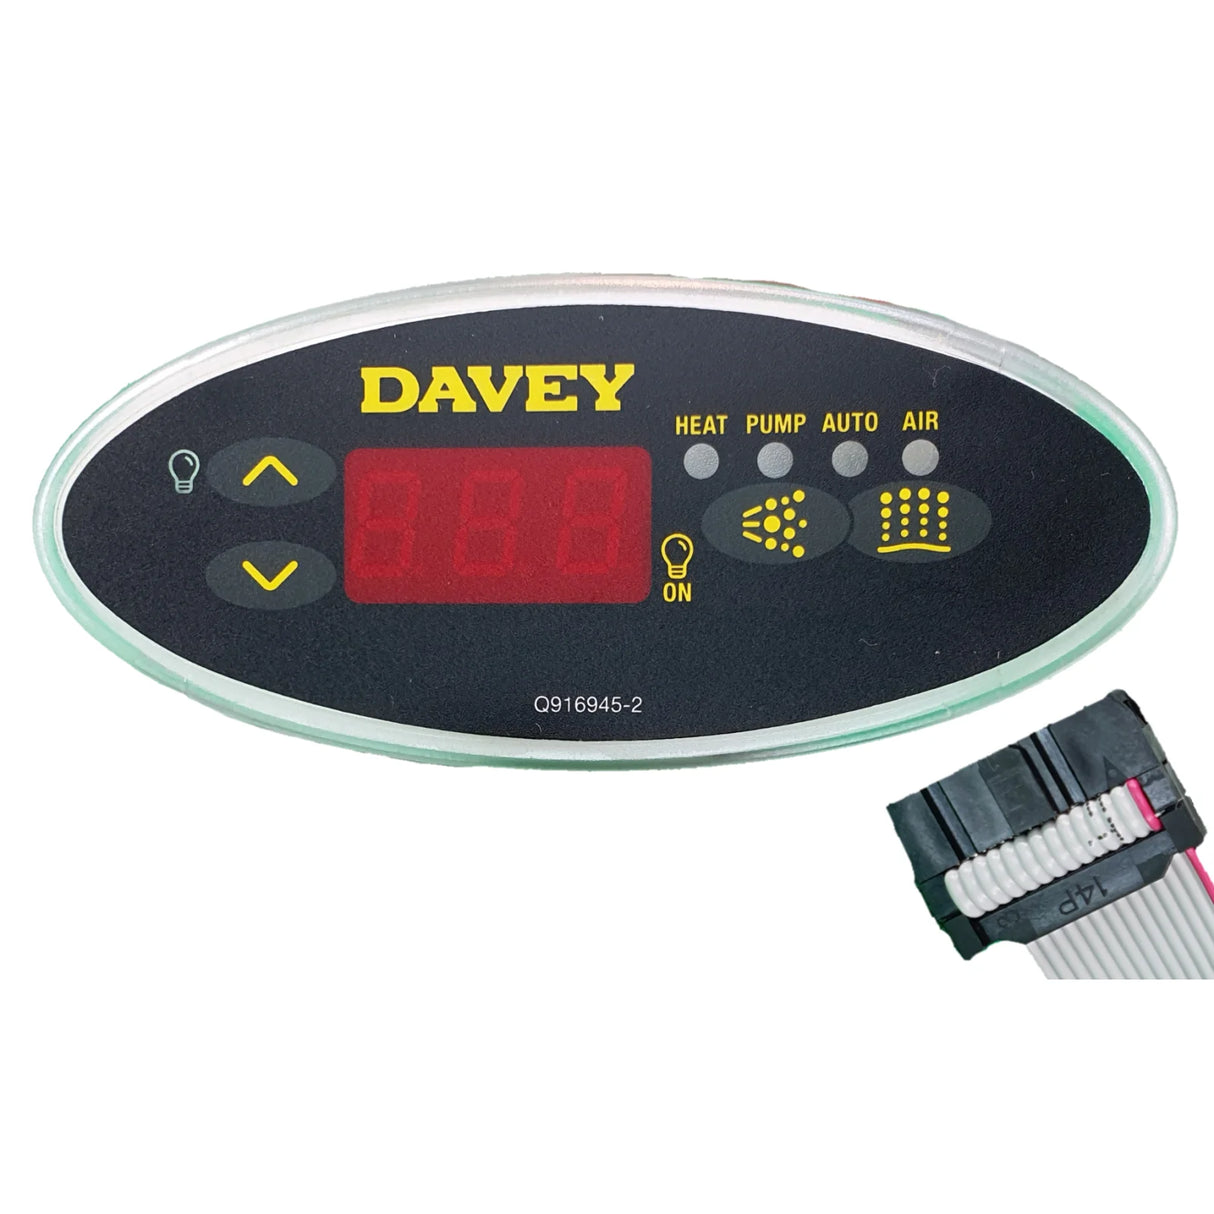 Davey Spaquip Spa Power SP 400, 500, 600, 601 Touchpad Control Panel Key Pad - Oval - Heater and Spa Parts